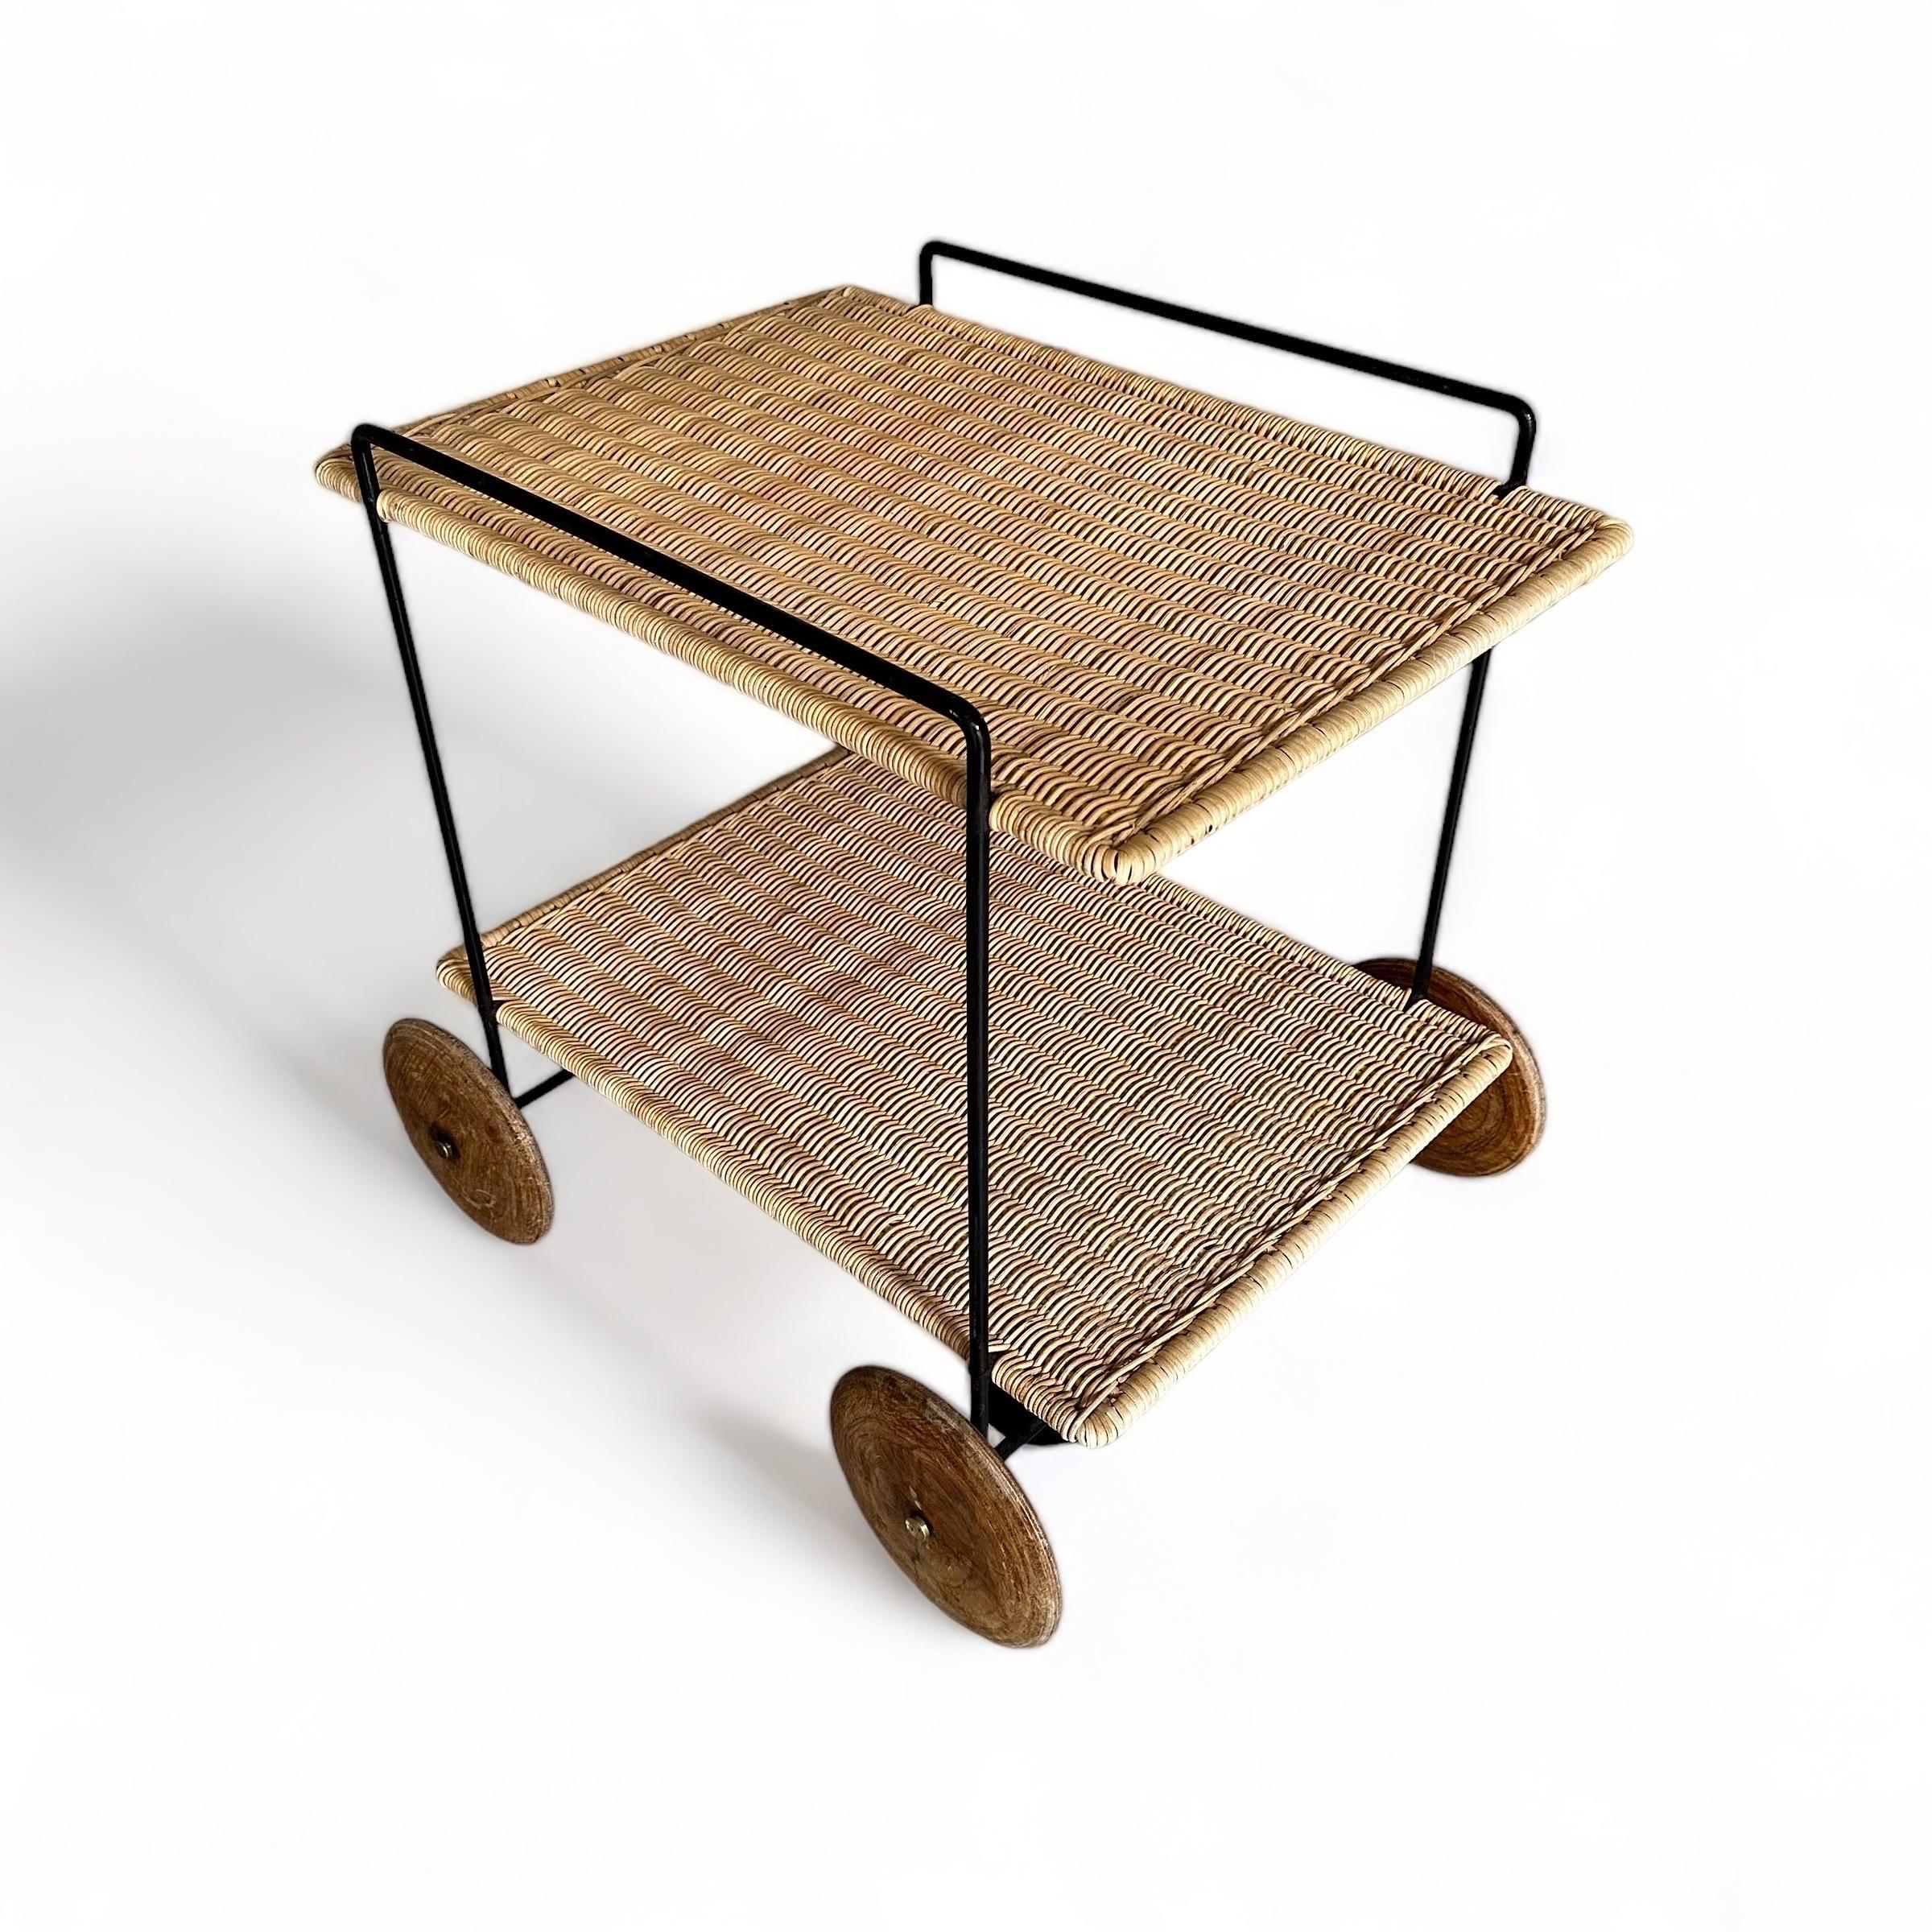 Mid Century Modern vintage organic bar cart or serving trolley by Carl Auböck 1951 and executed by Werkstätte Auböck, Vienna.

While the wonderful serving trolley shows black lacquered round iron frame and two tiers from woven wicker in honey brown